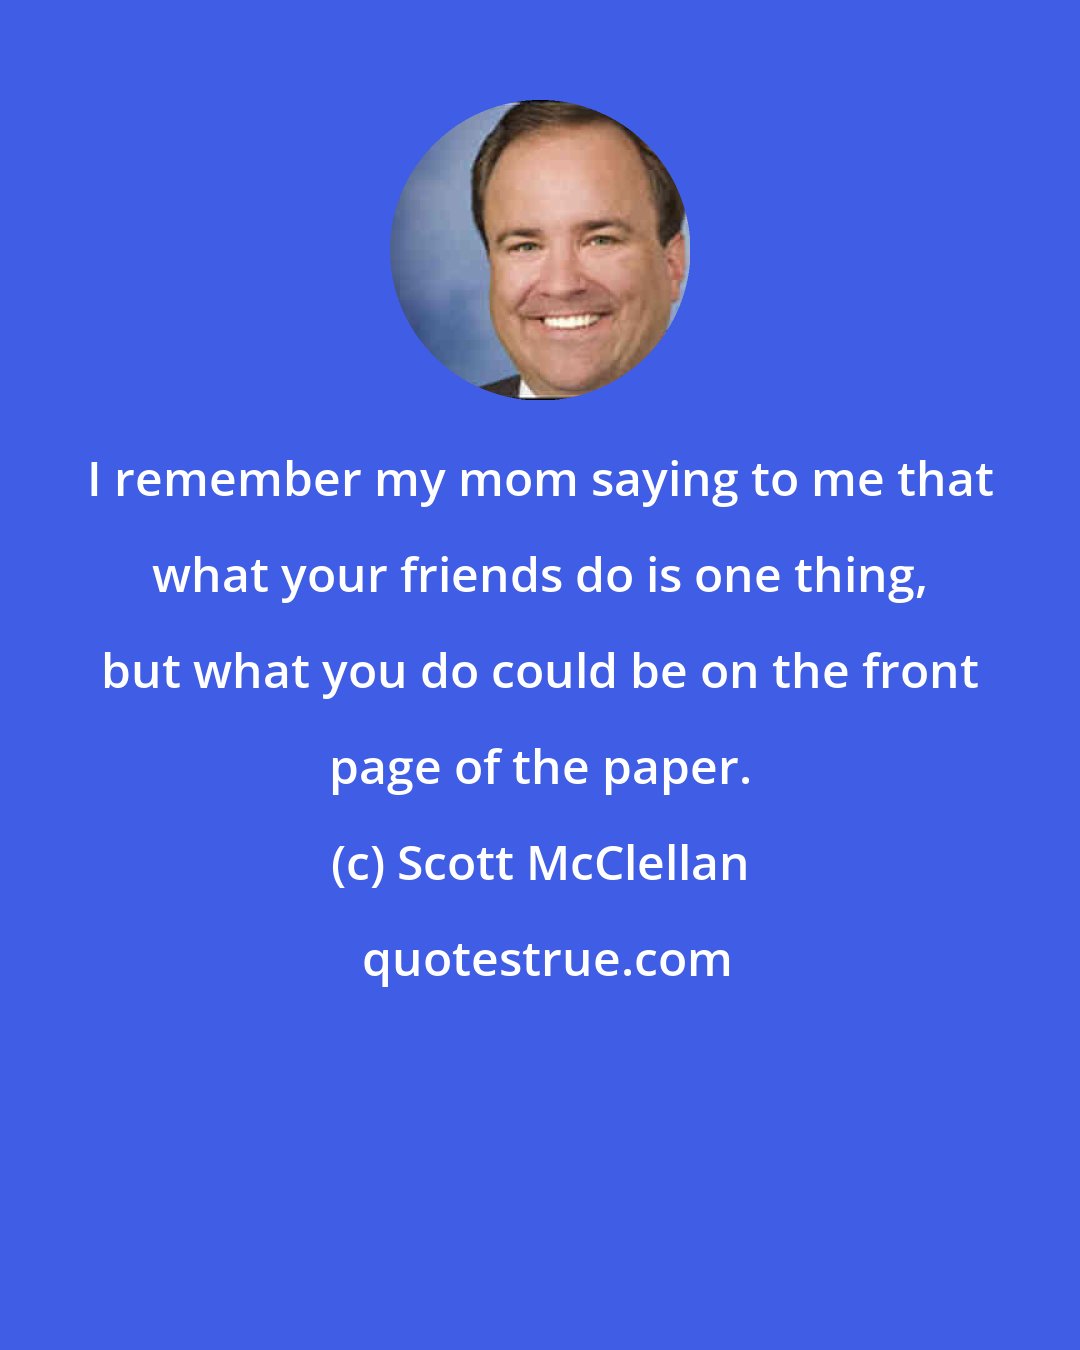 Scott McClellan: I remember my mom saying to me that what your friends do is one thing, but what you do could be on the front page of the paper.